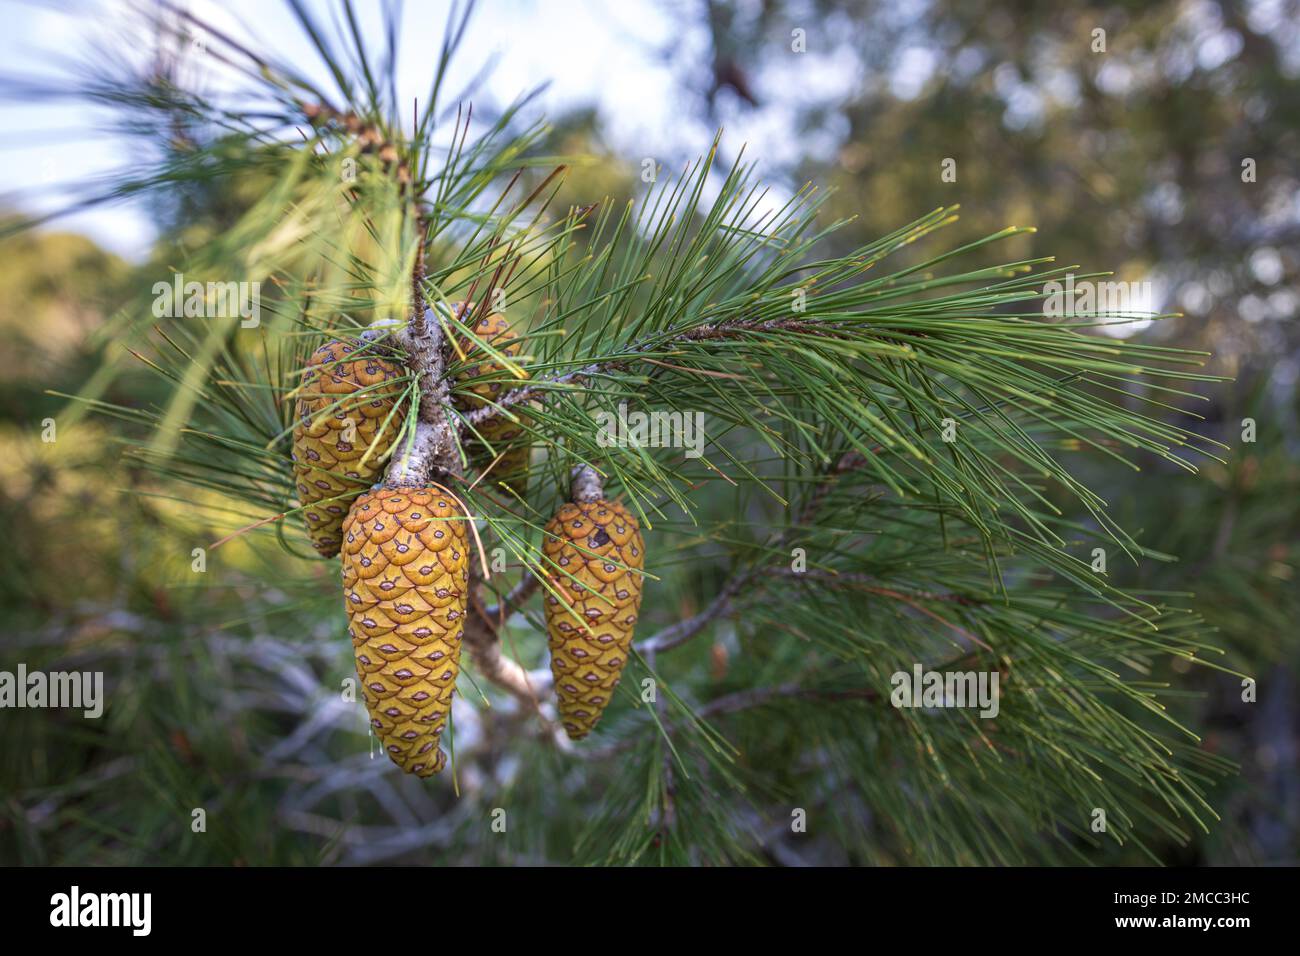 Pine branches with young cones against the blue sky Stock Photo